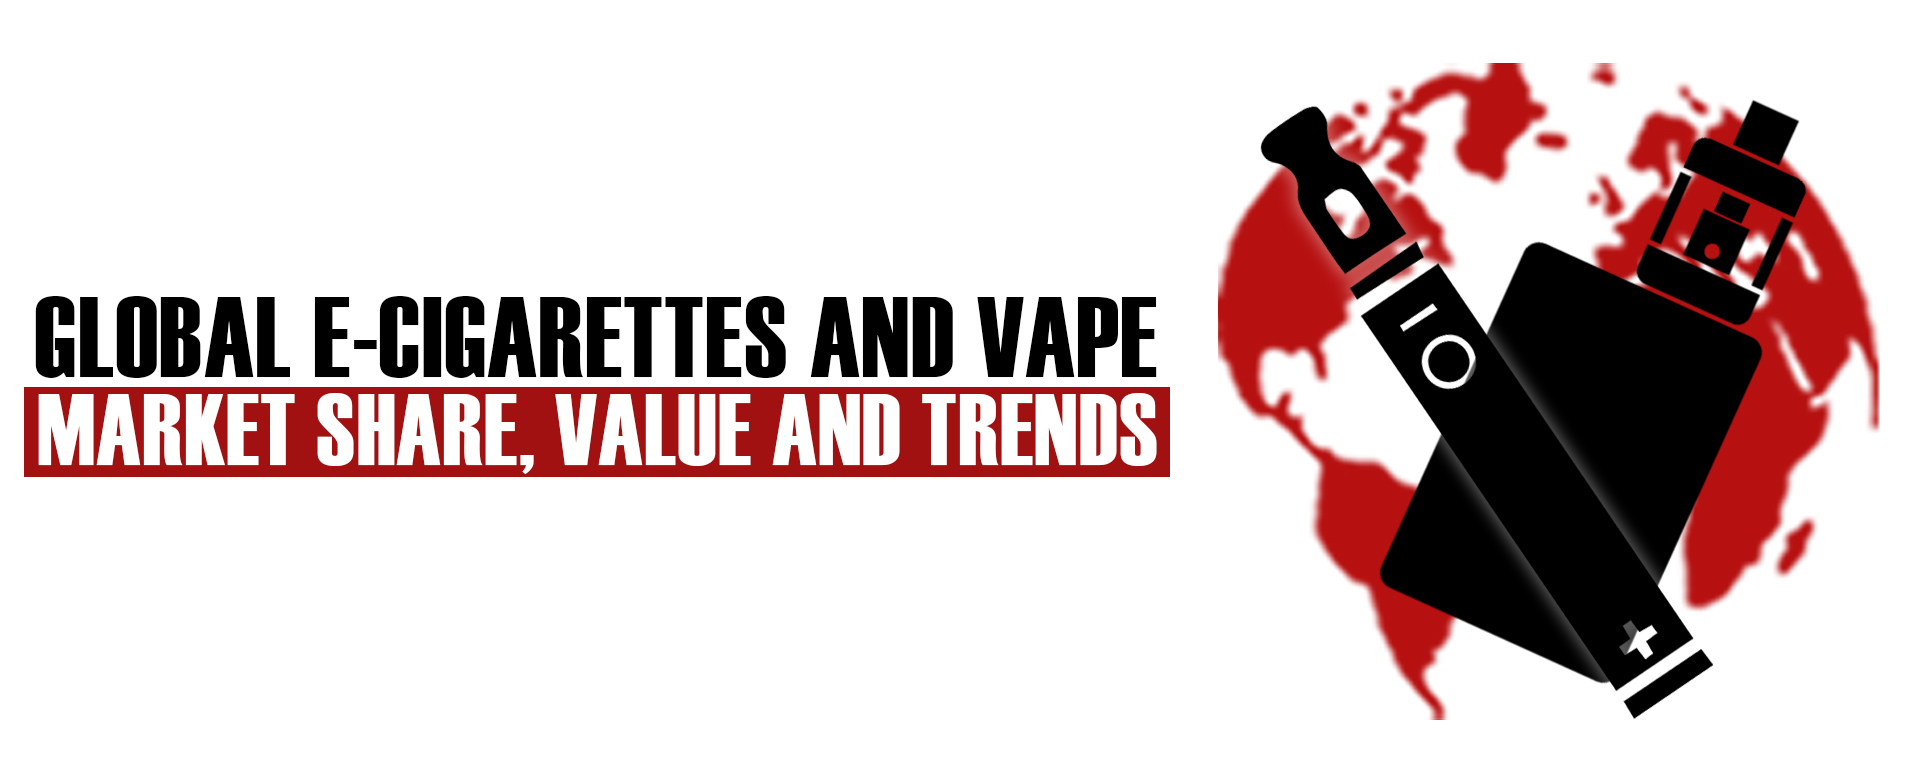 Global E-Cigarettes and Vape Market Share, Value and Trends